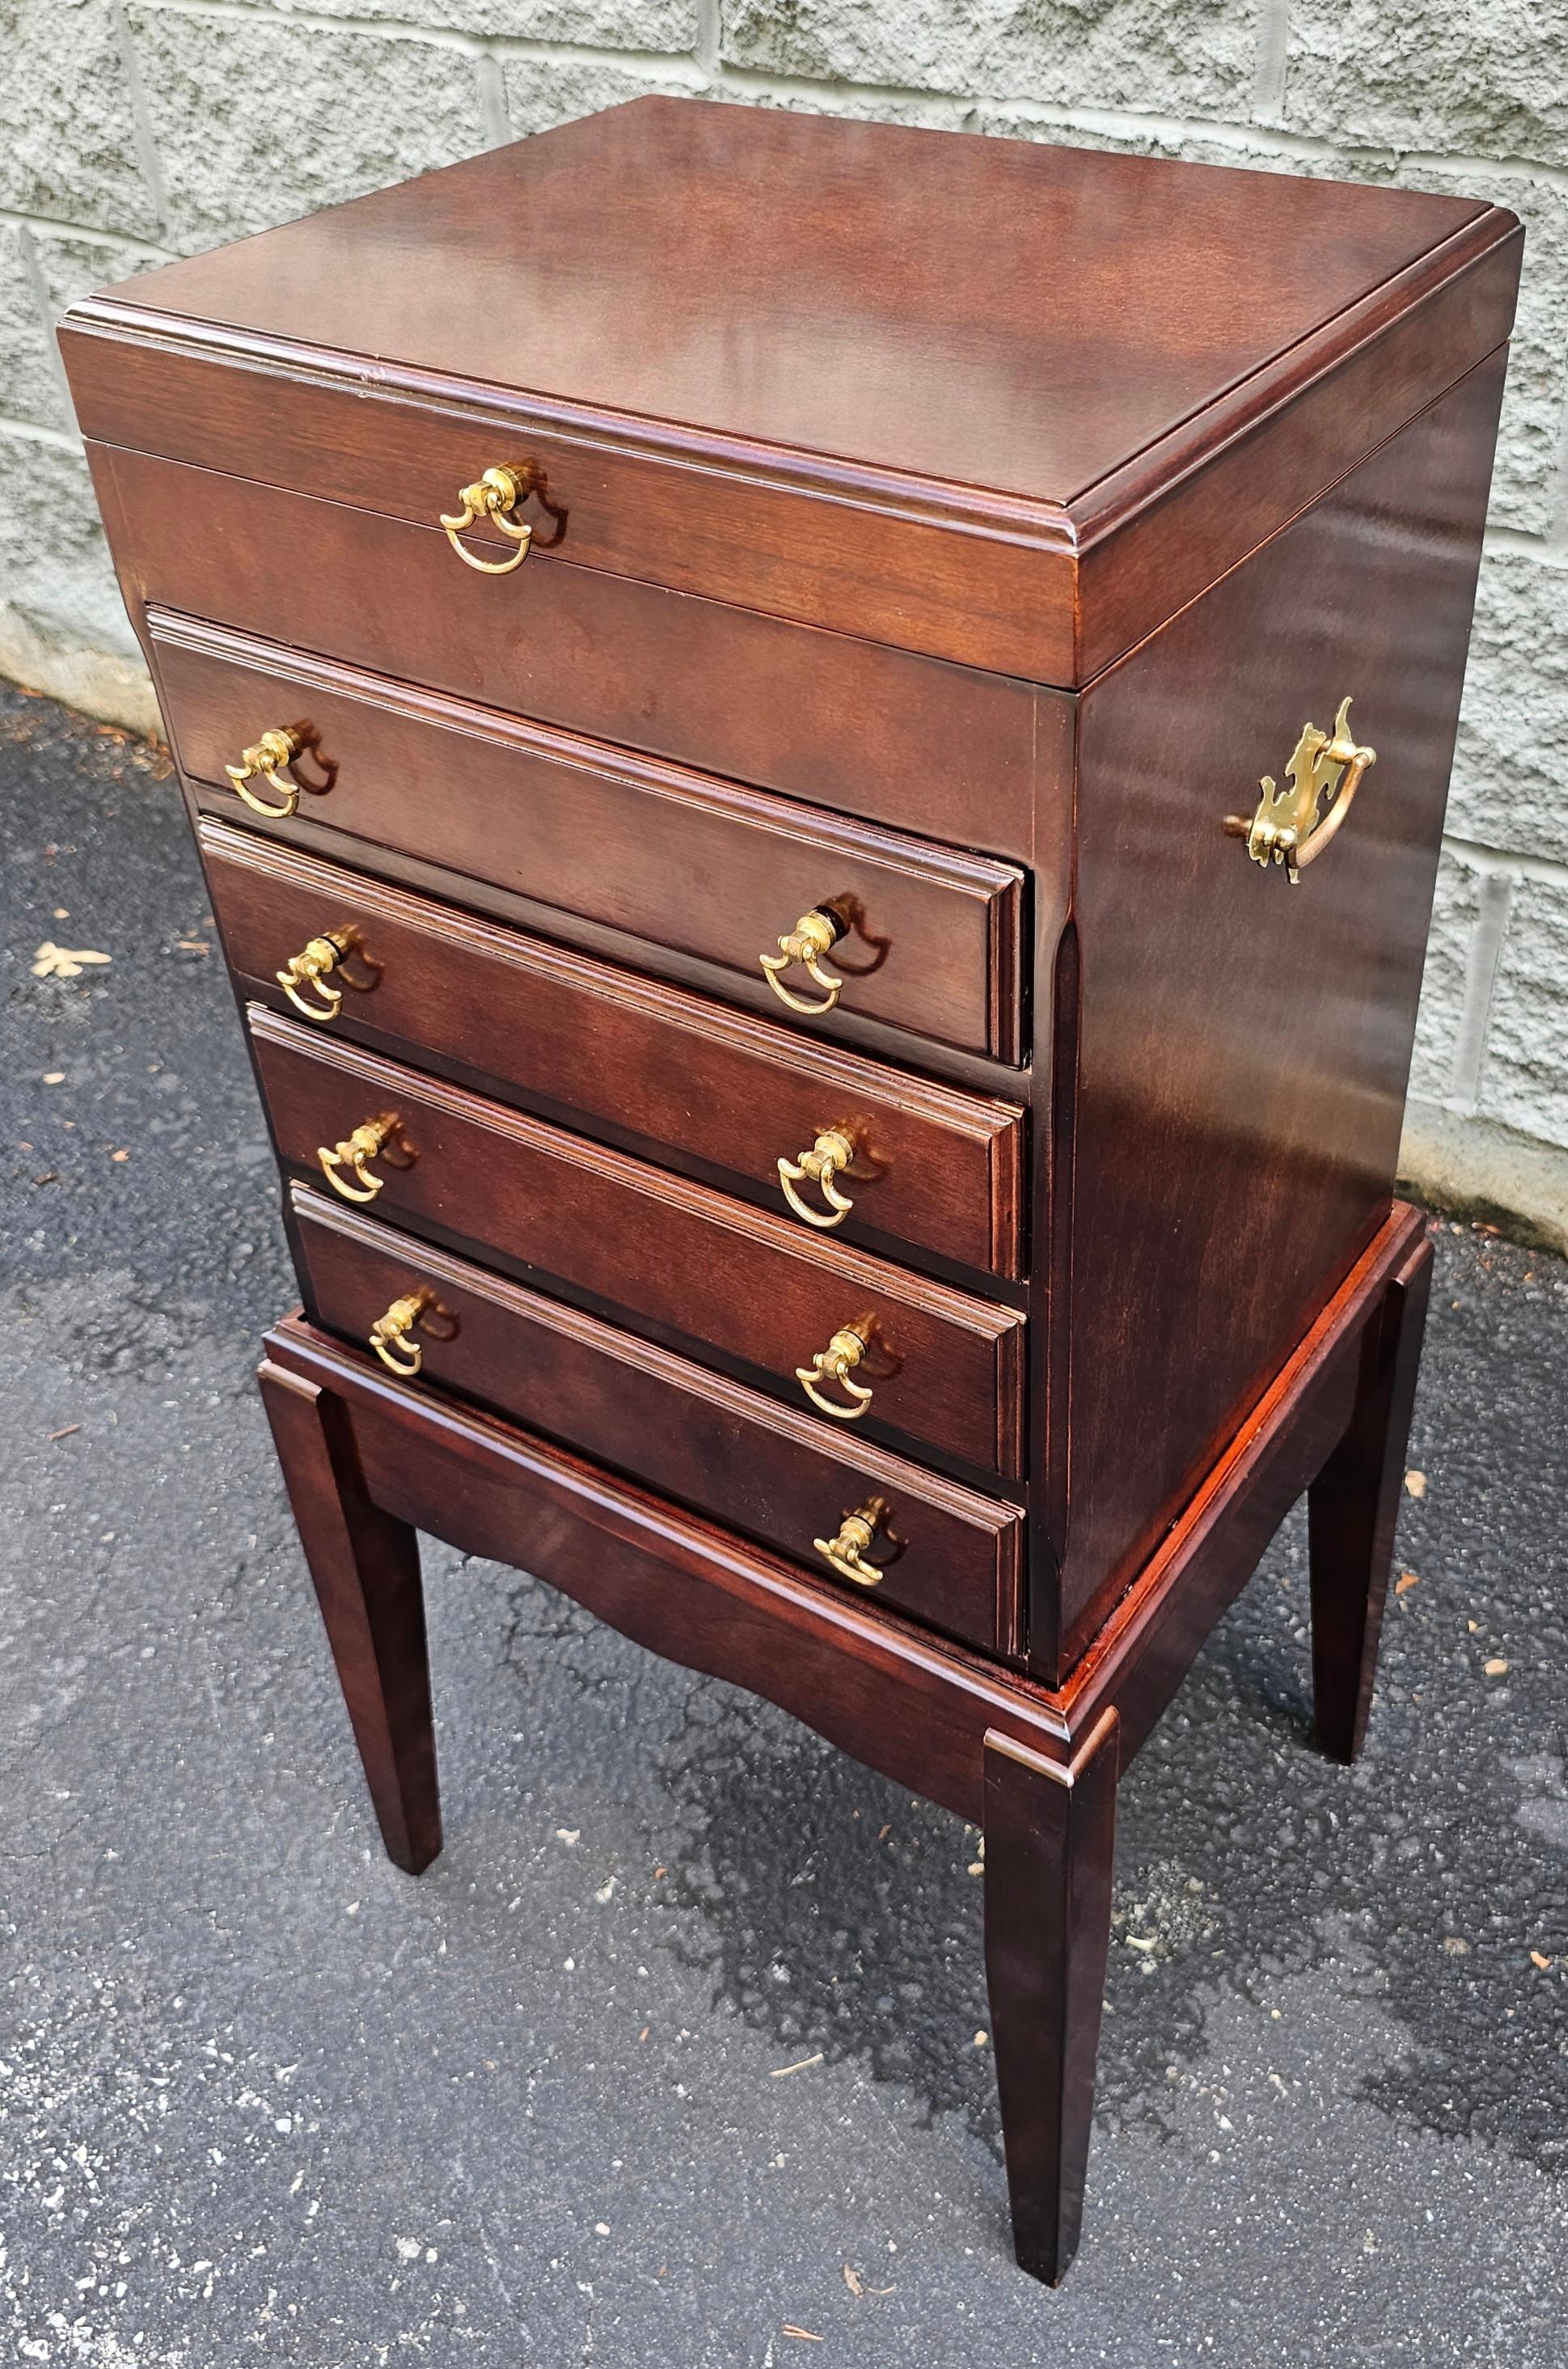 Other Late 20th Century Mahogany Silver Chest on Stand